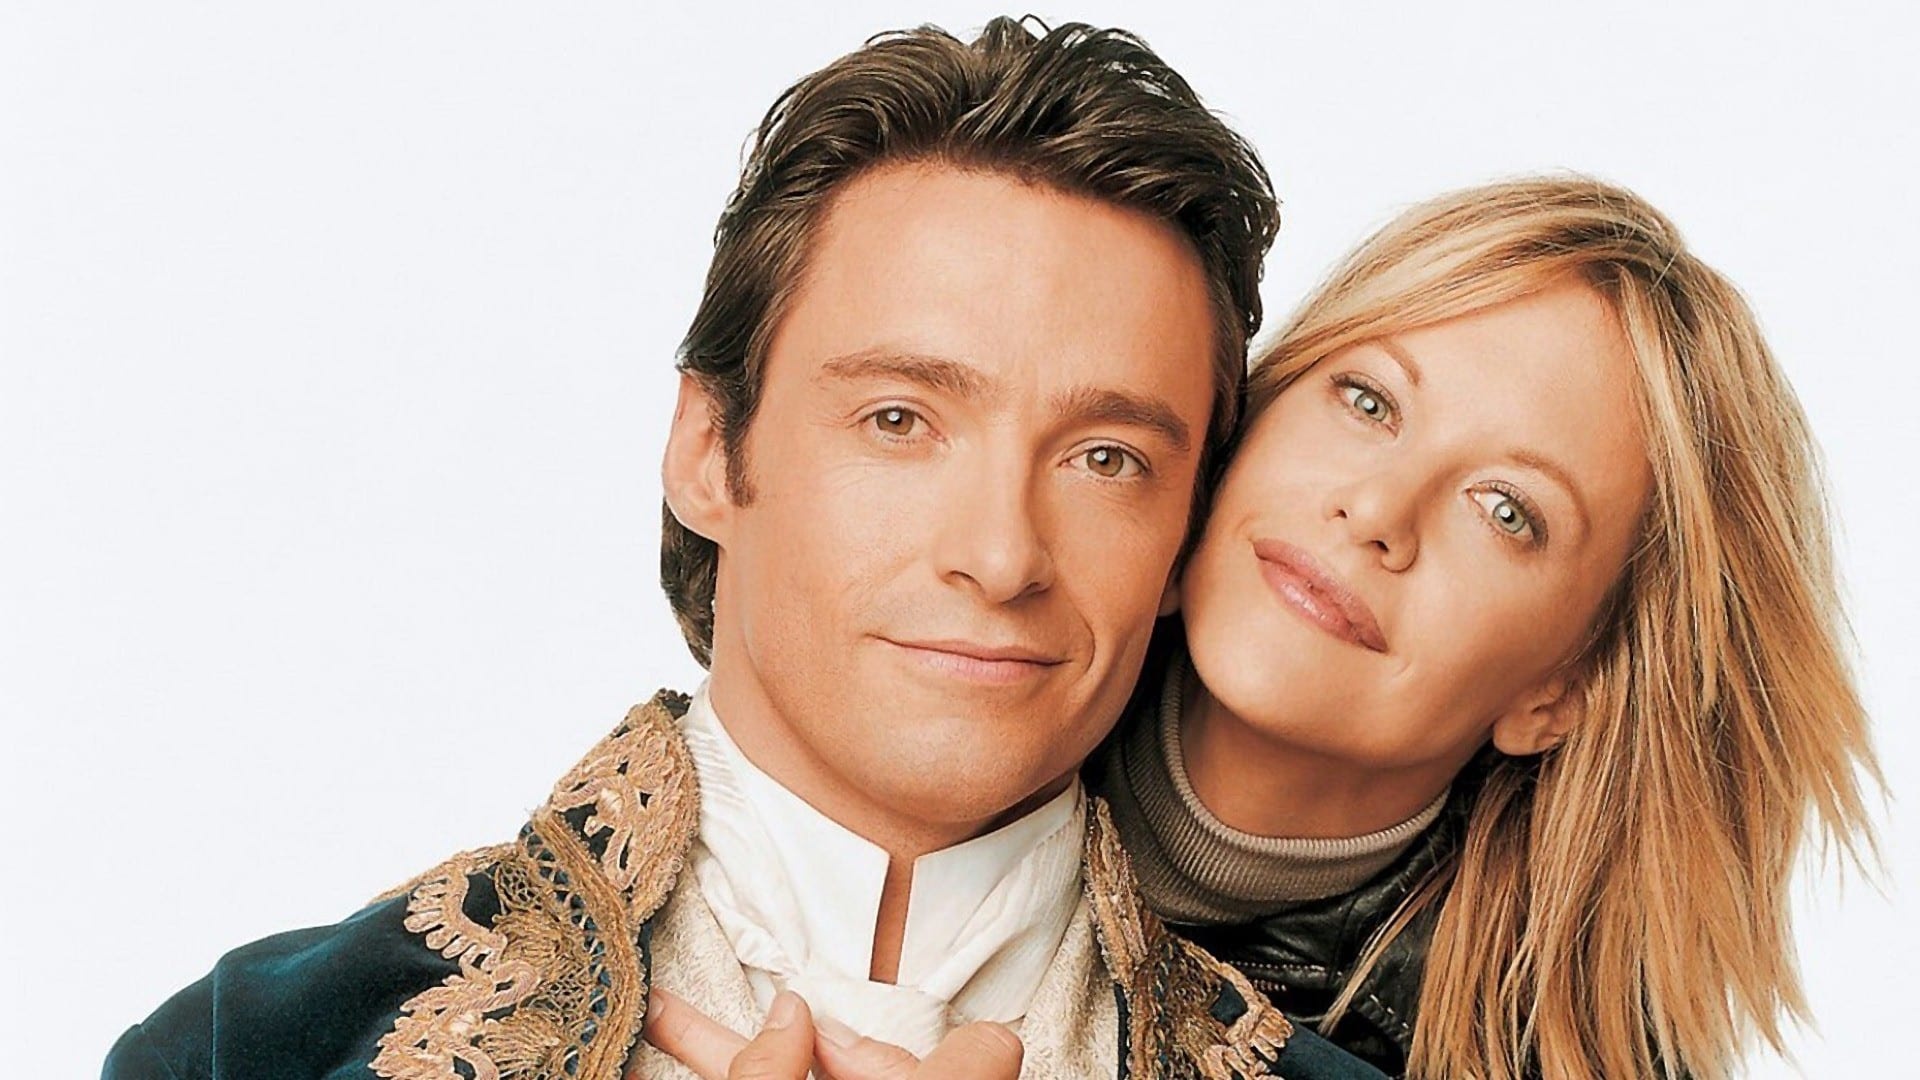 Kate and Leopold: Hugh Jackman was 31 while Meg Ryan was 39 while filming. 1920x1080 Full HD Wallpaper.